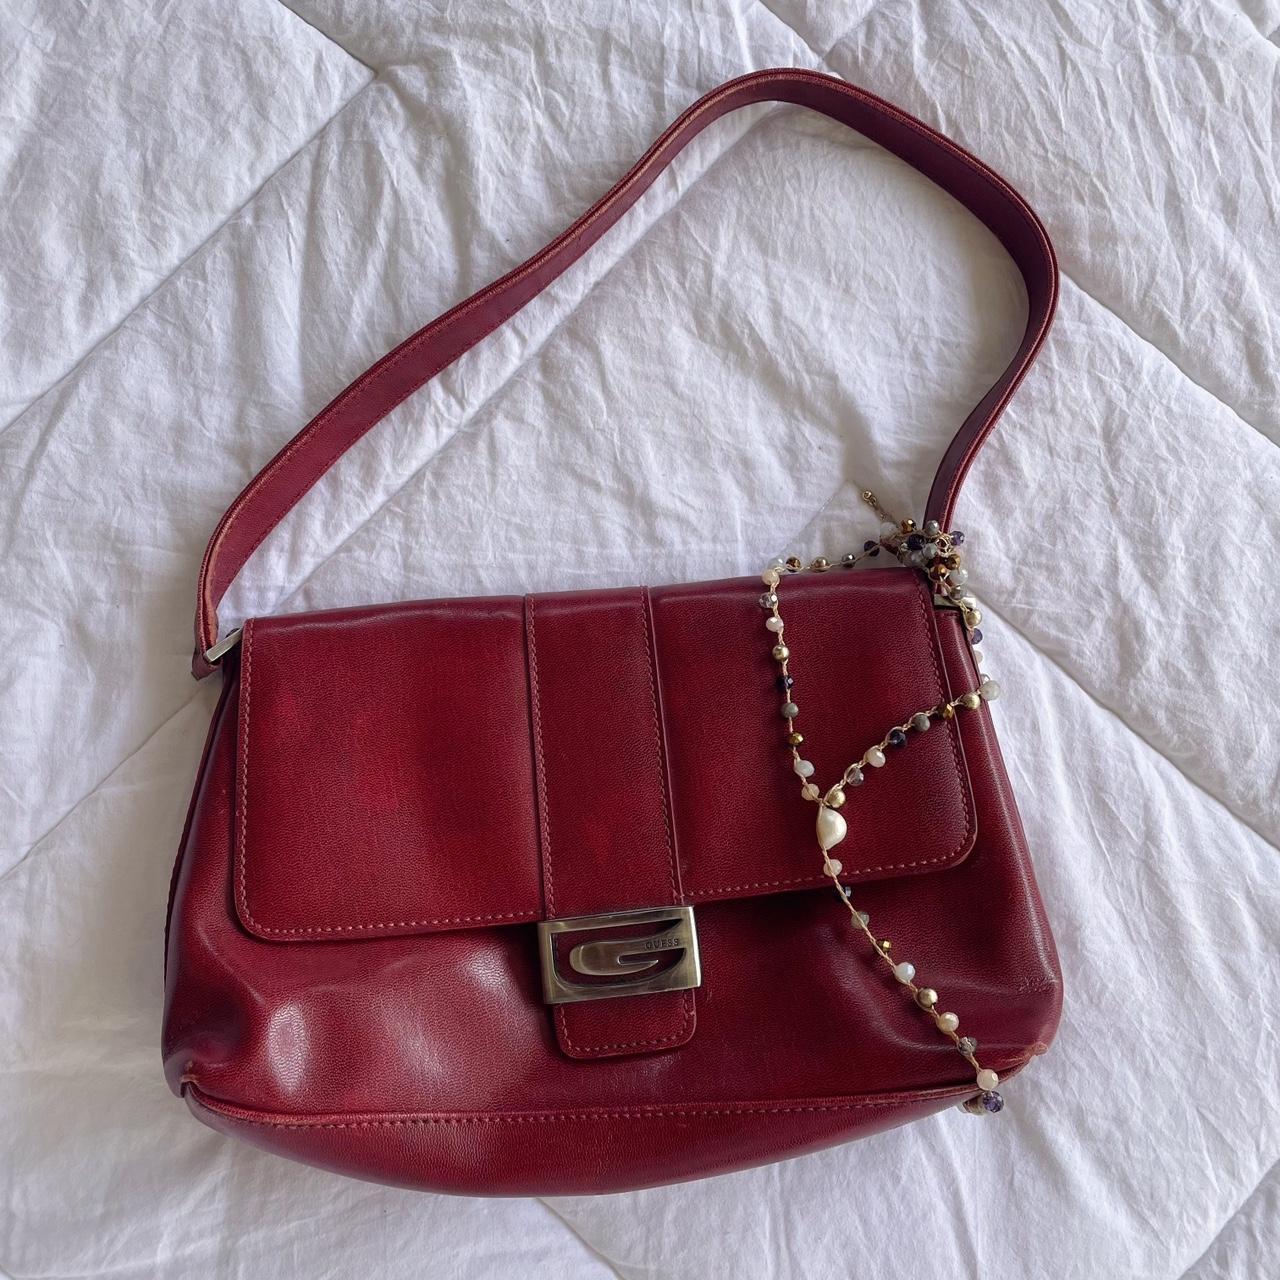 Guess Women's Red and Silver Bag | Depop